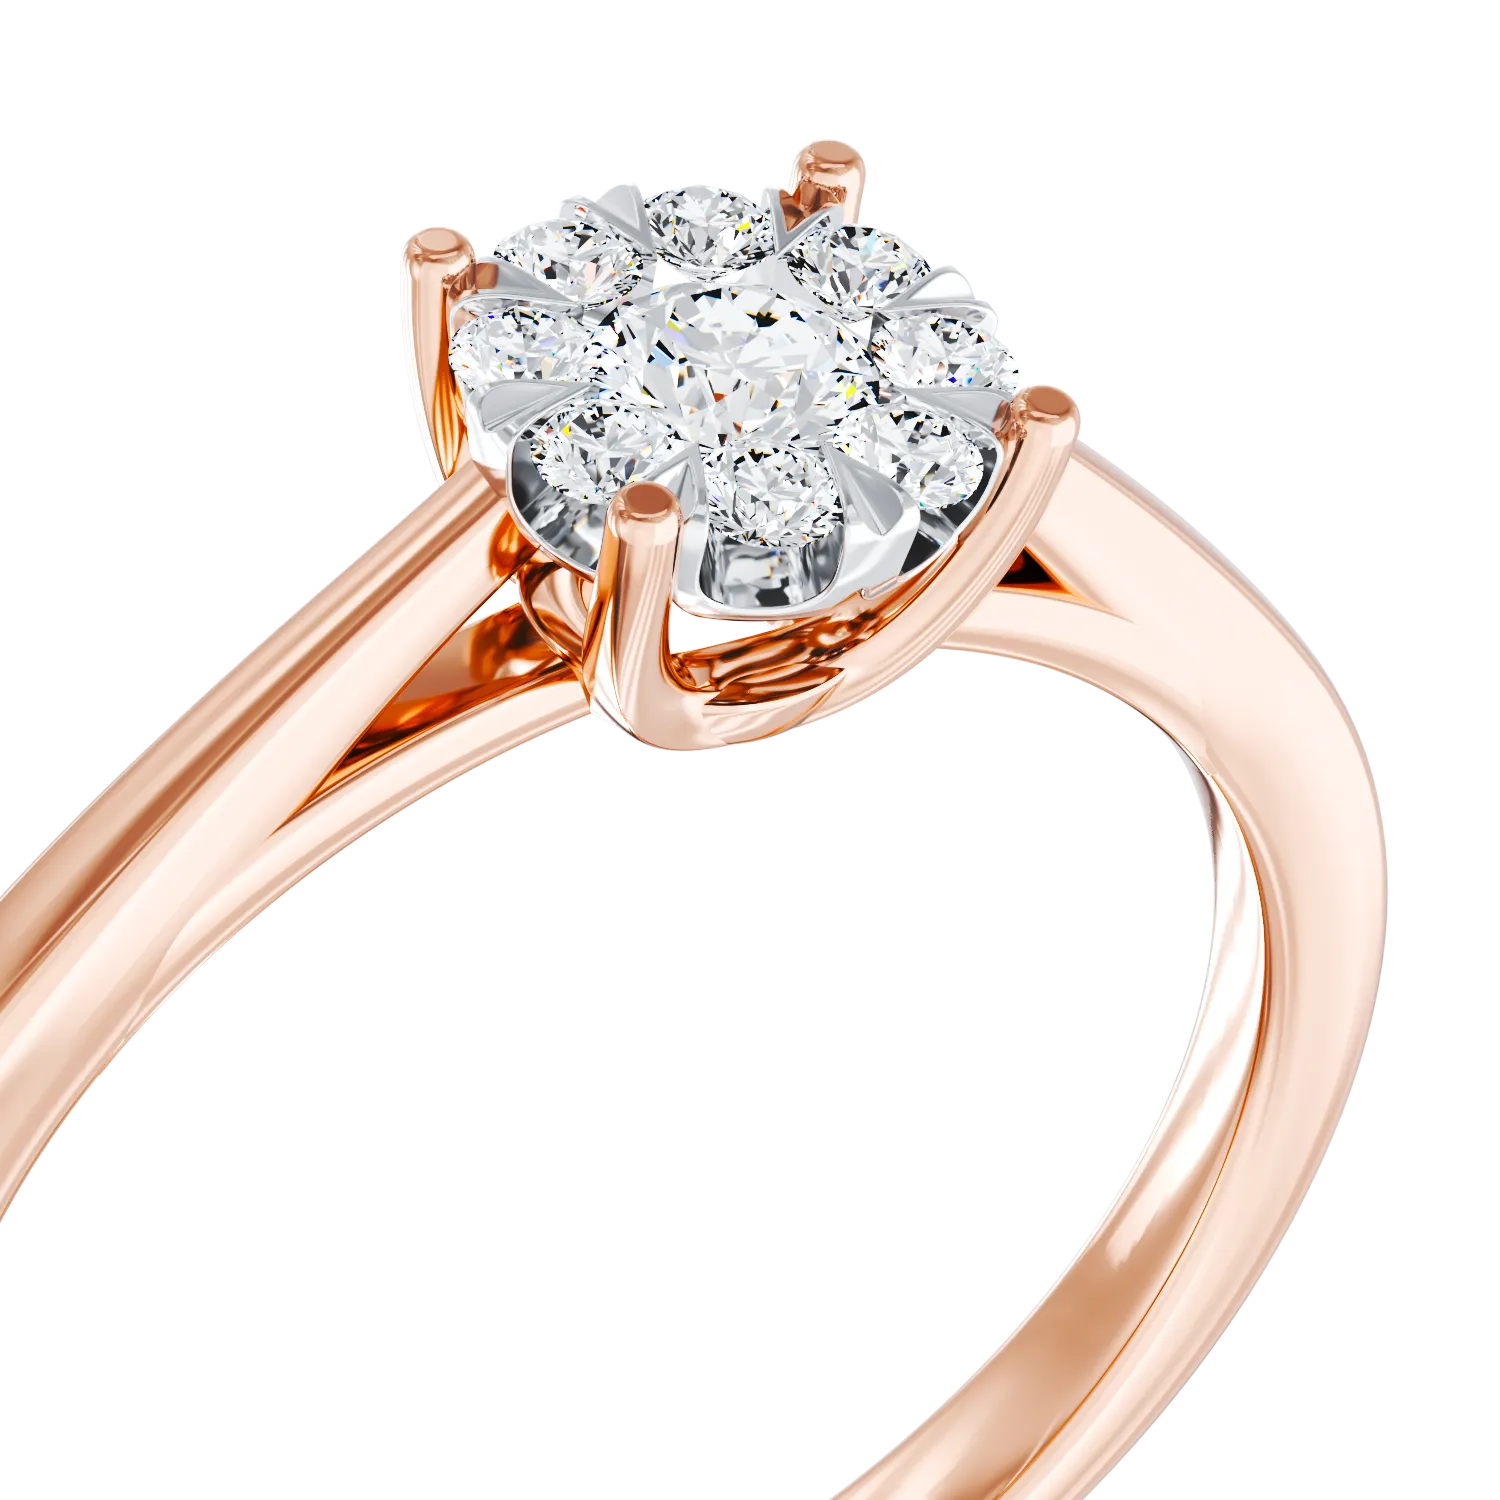 18K rose gold engagement ring with 0.255ct diamonds